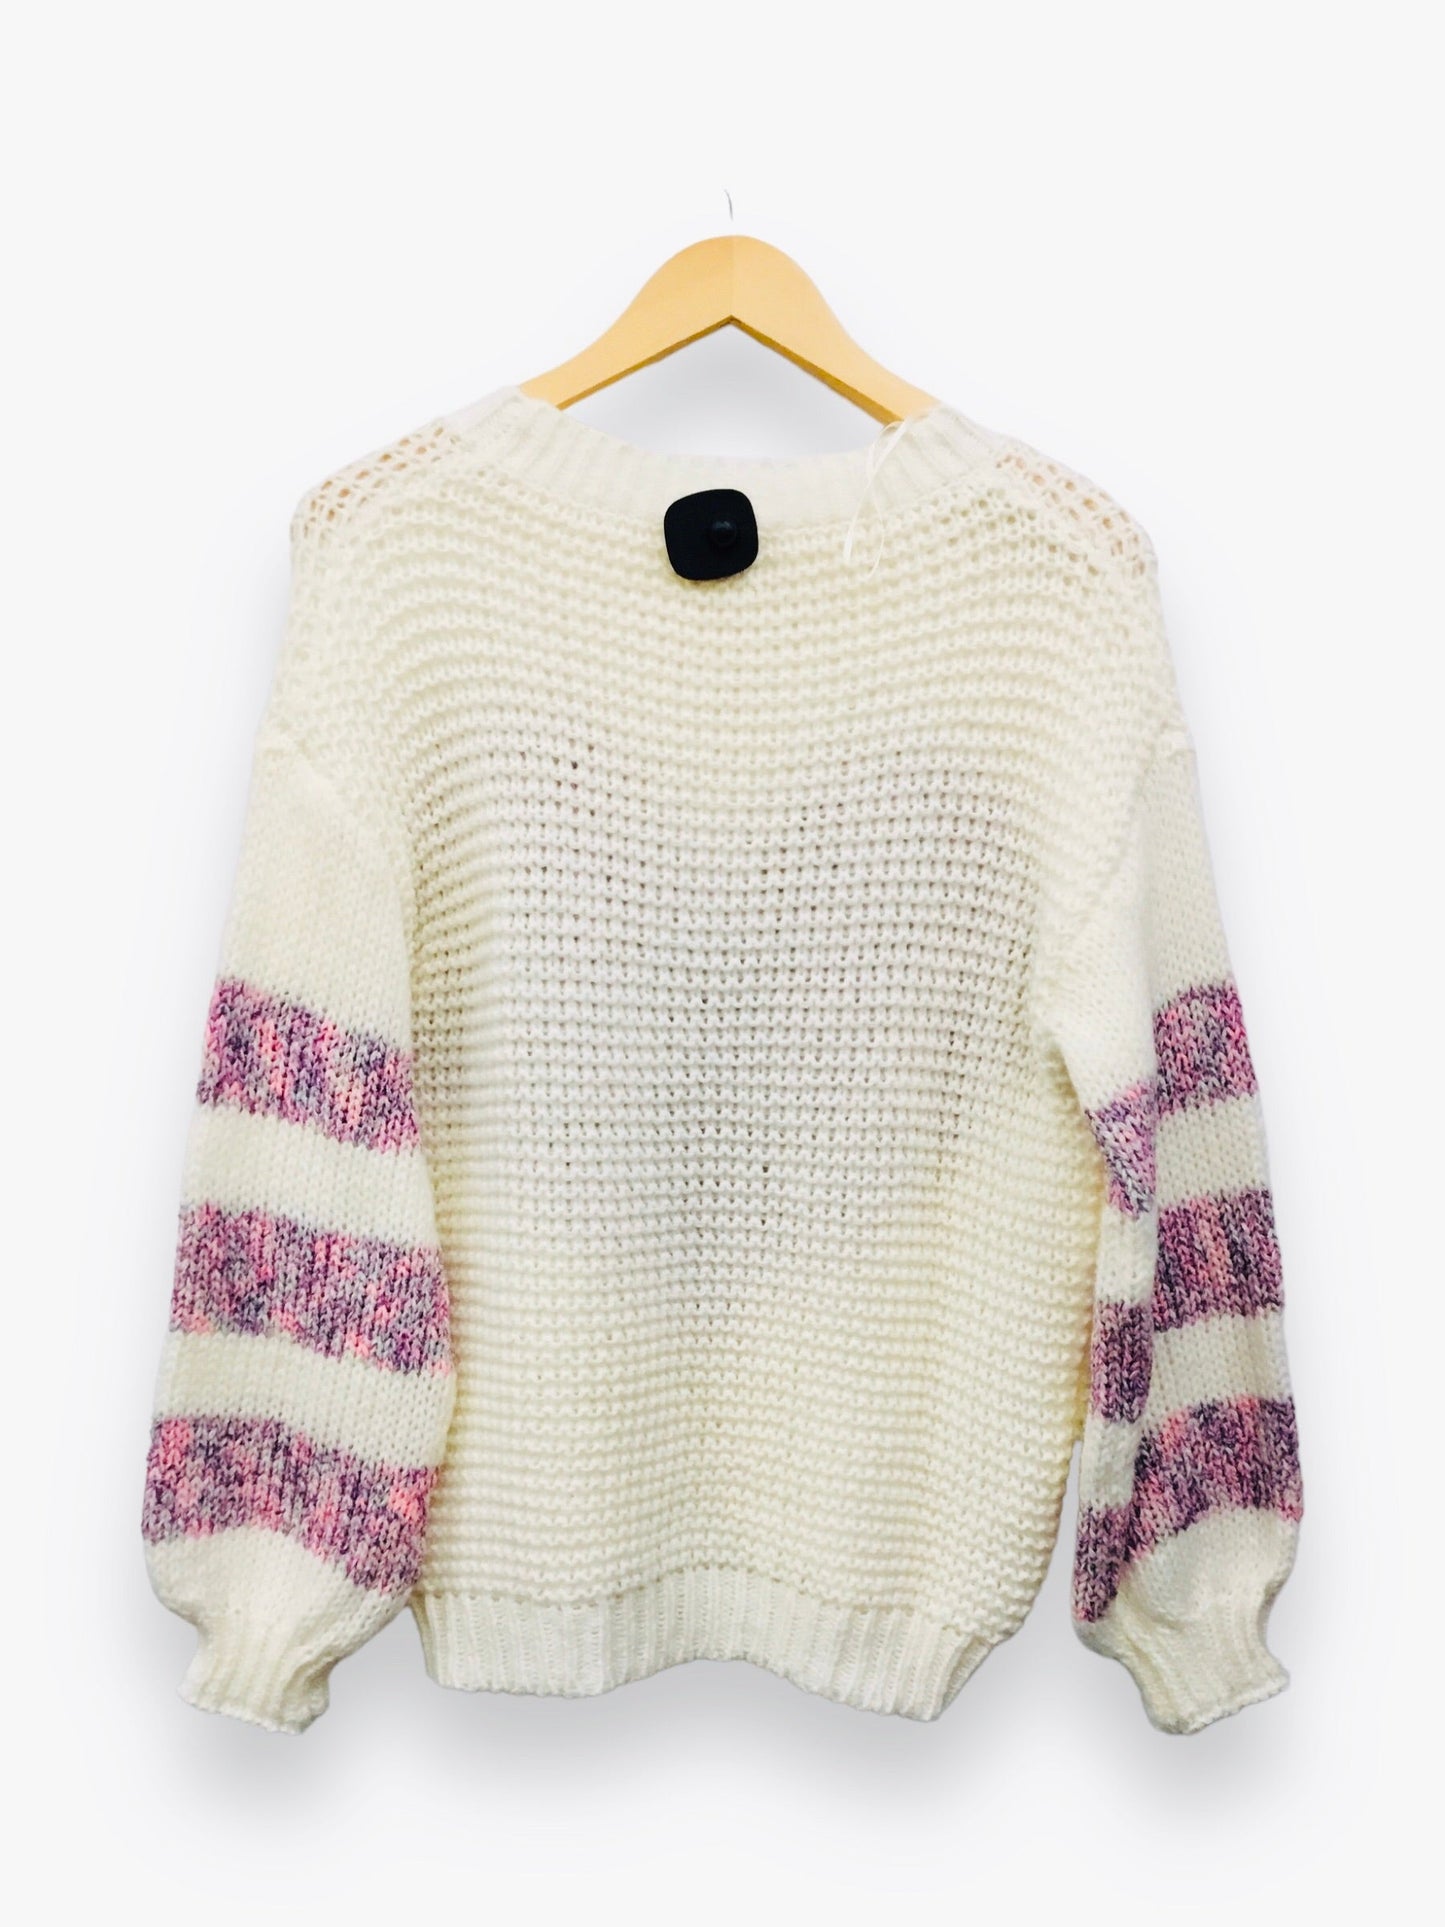 NWT Cream Sweater Dreamers By Debut Size Xs